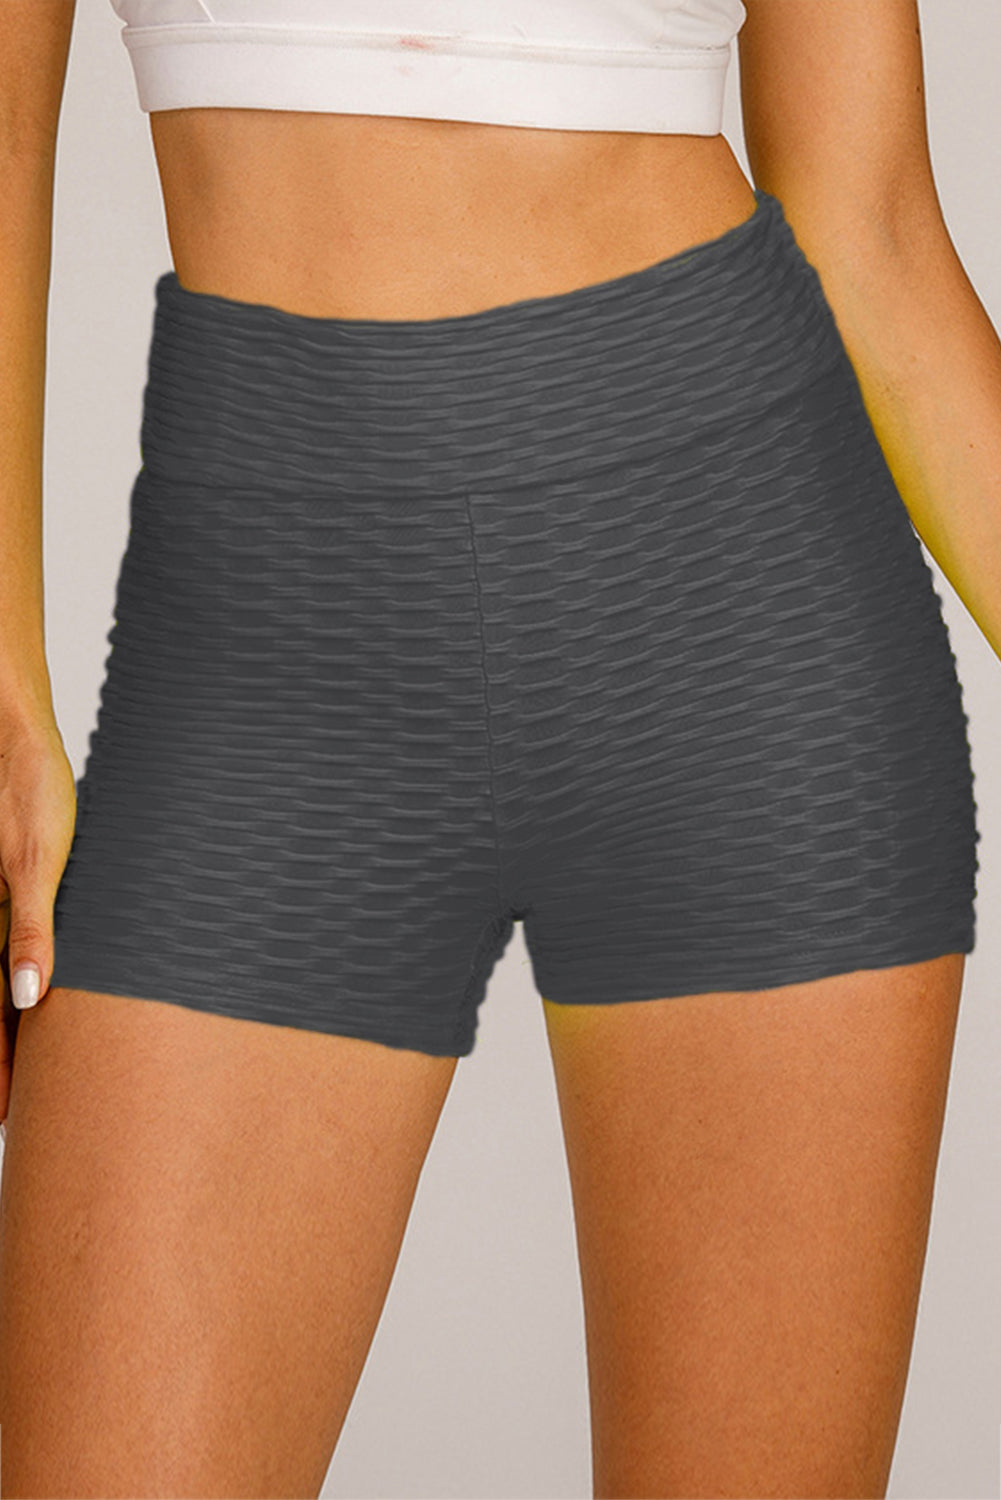 Gray High Waisted Yoga Fitness Shorts for Women LC263790-11